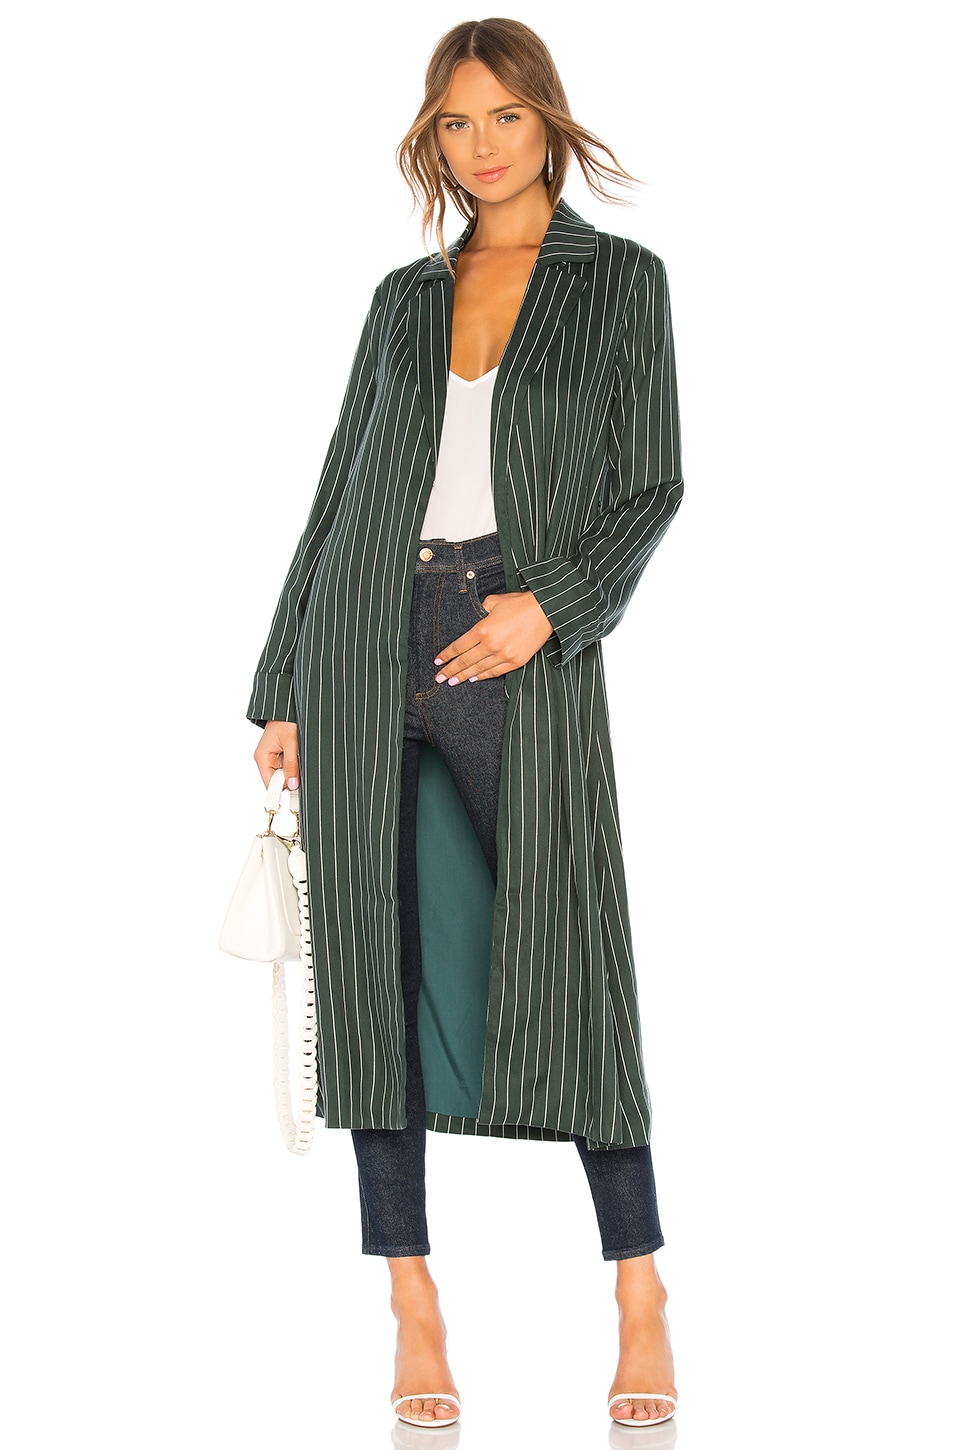 Privacy Please Tessa Trench Coat in Forest Green | REVOLVE